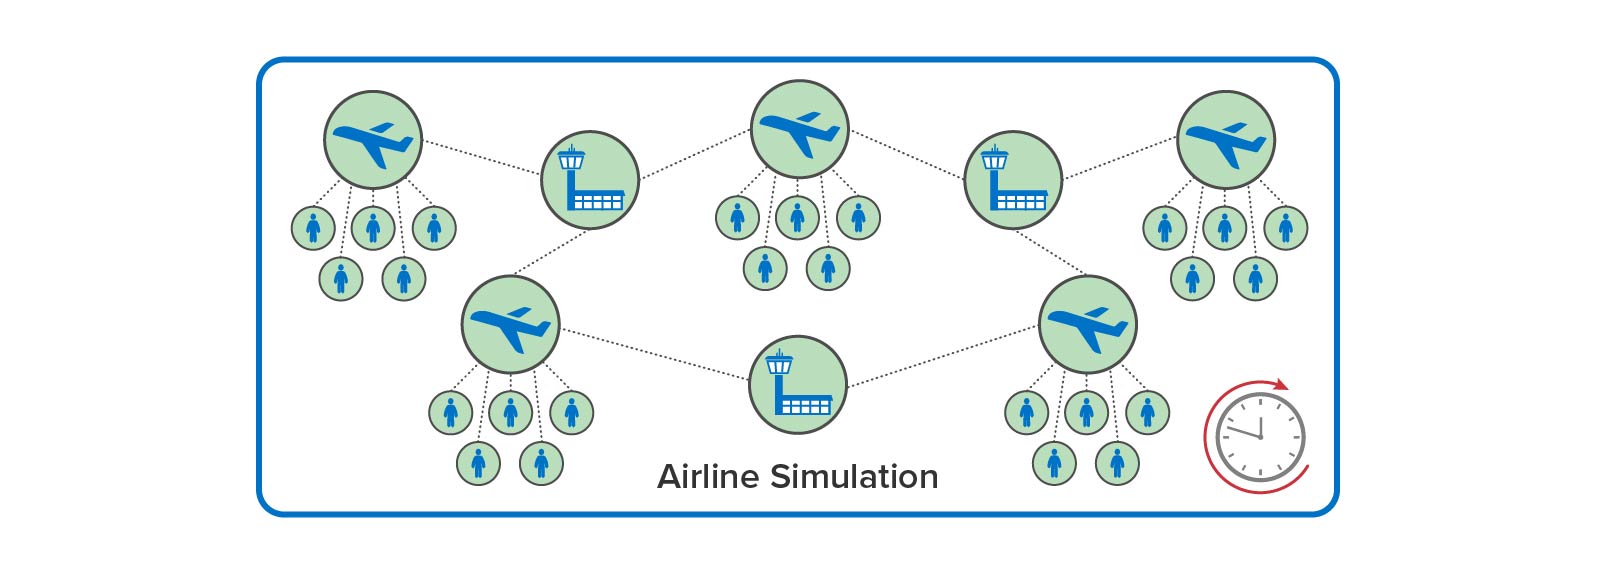 Image of airplanes, passengers, and airports as a digital twin simulation for an airline.